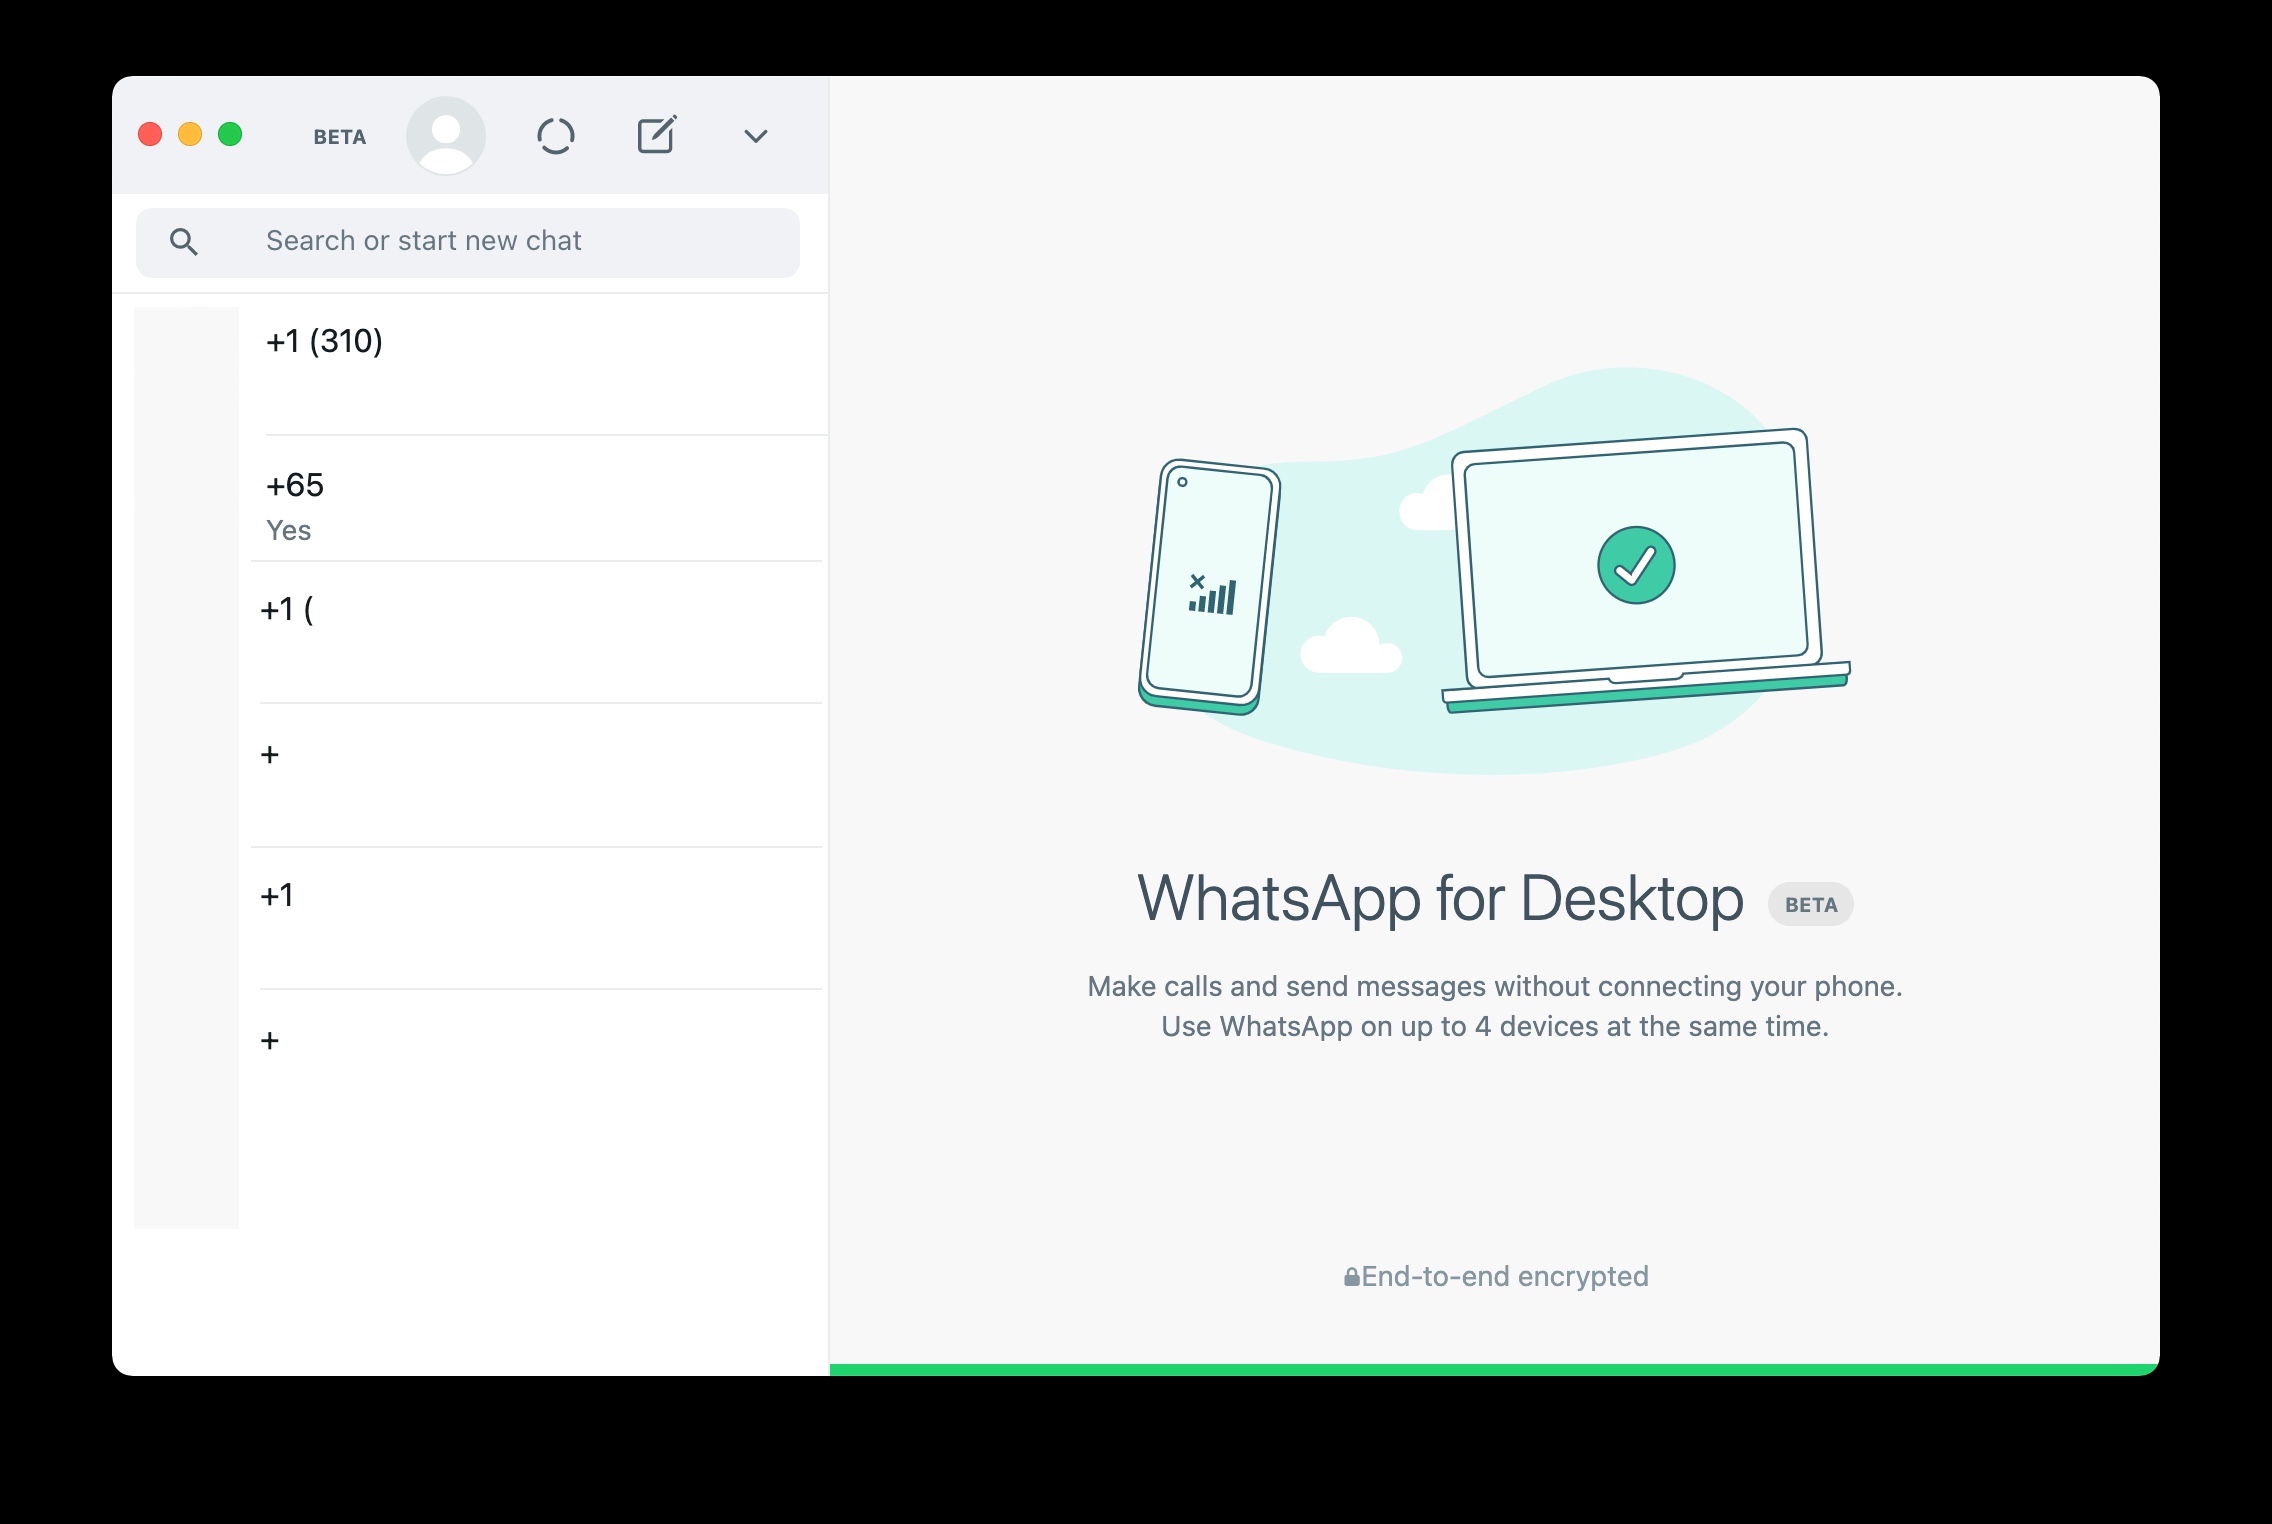 How to Use WhatsApp on Mac / PC Without a Phone